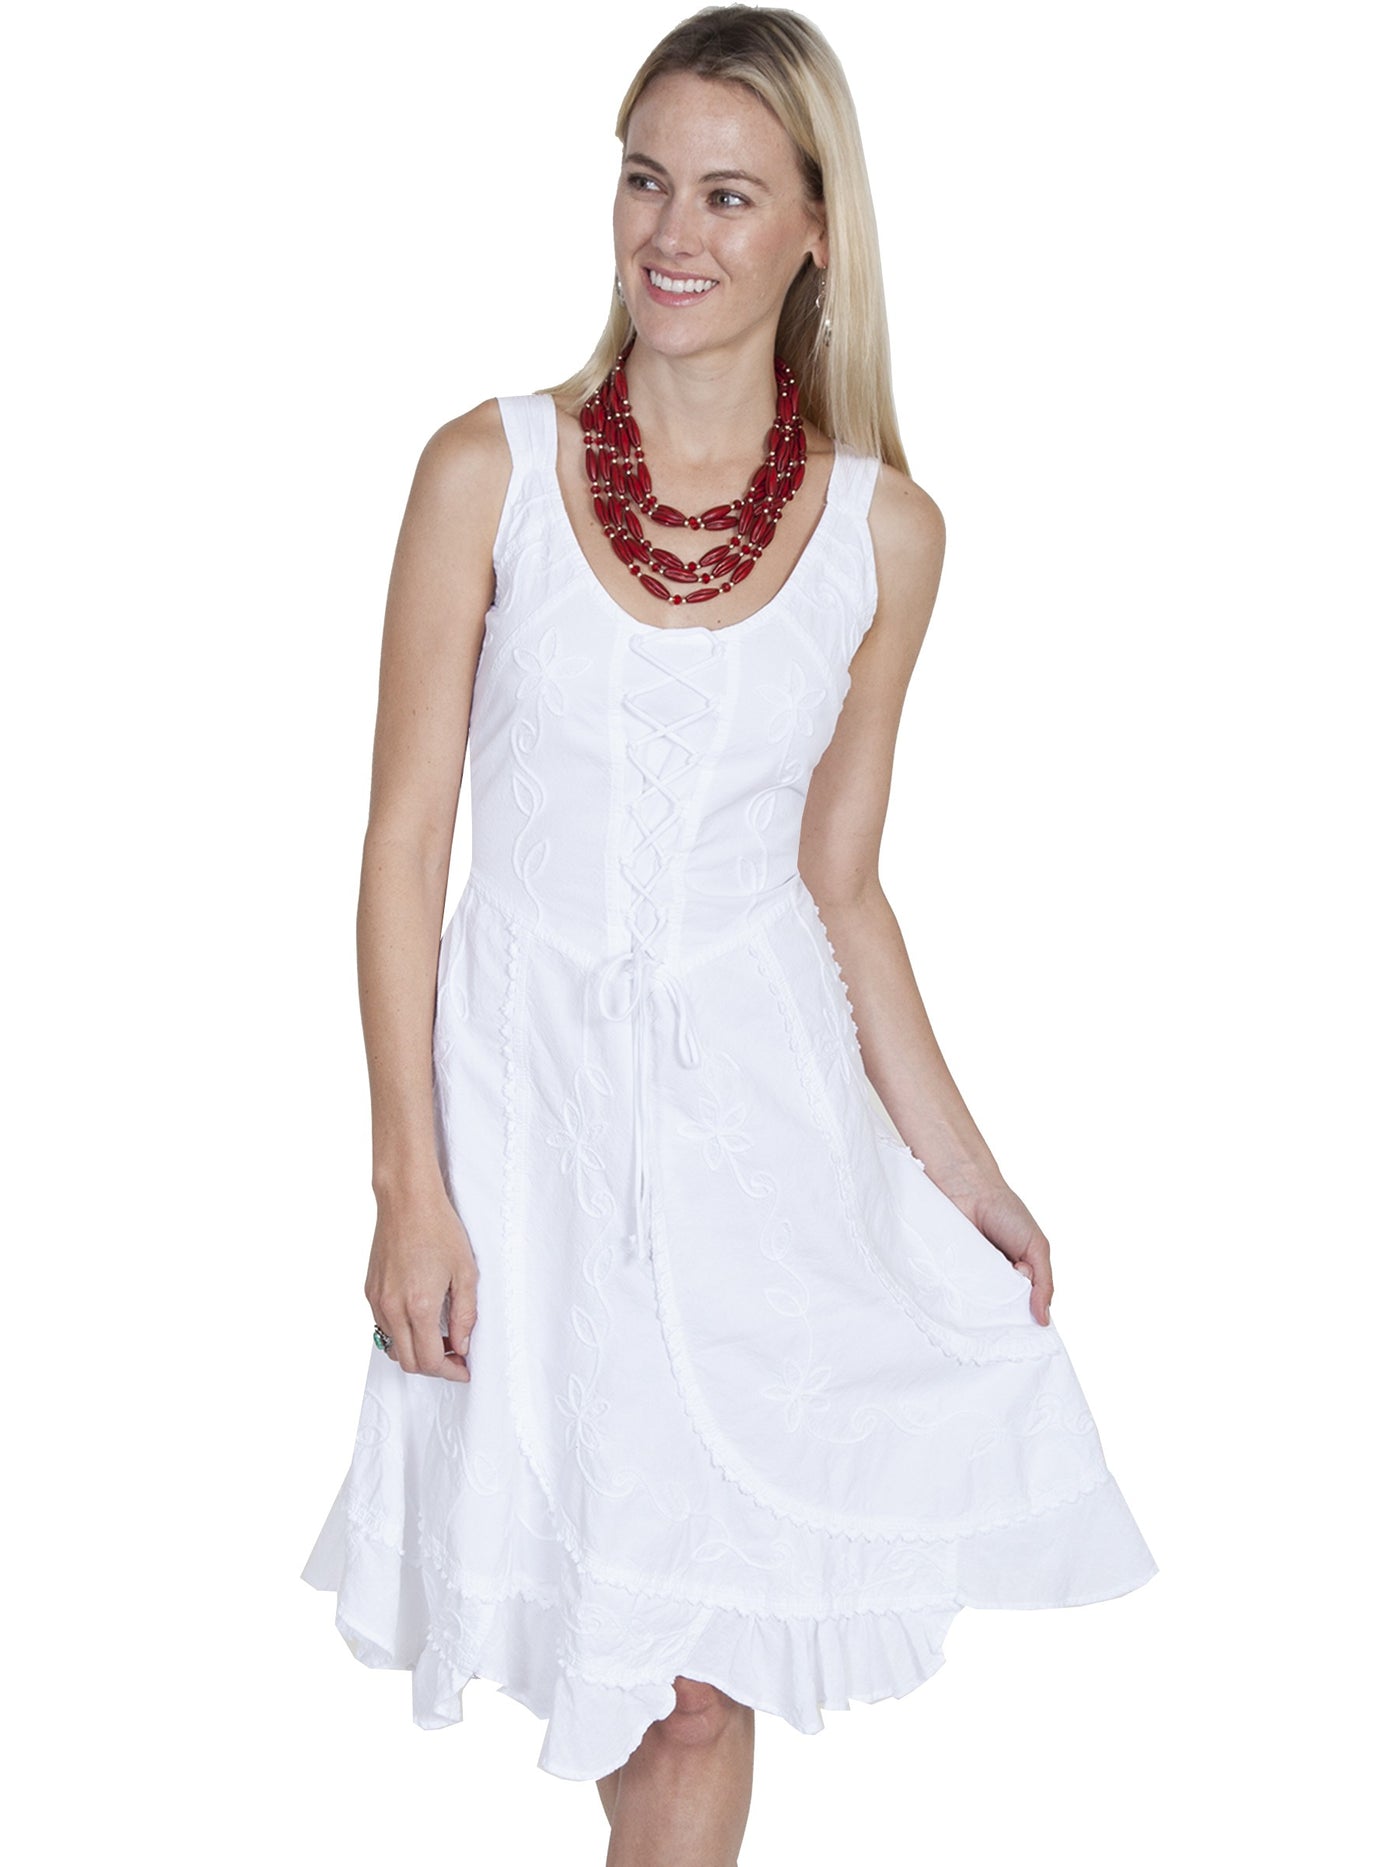 Western Romance Saloon Dress in White - SOLD OUT